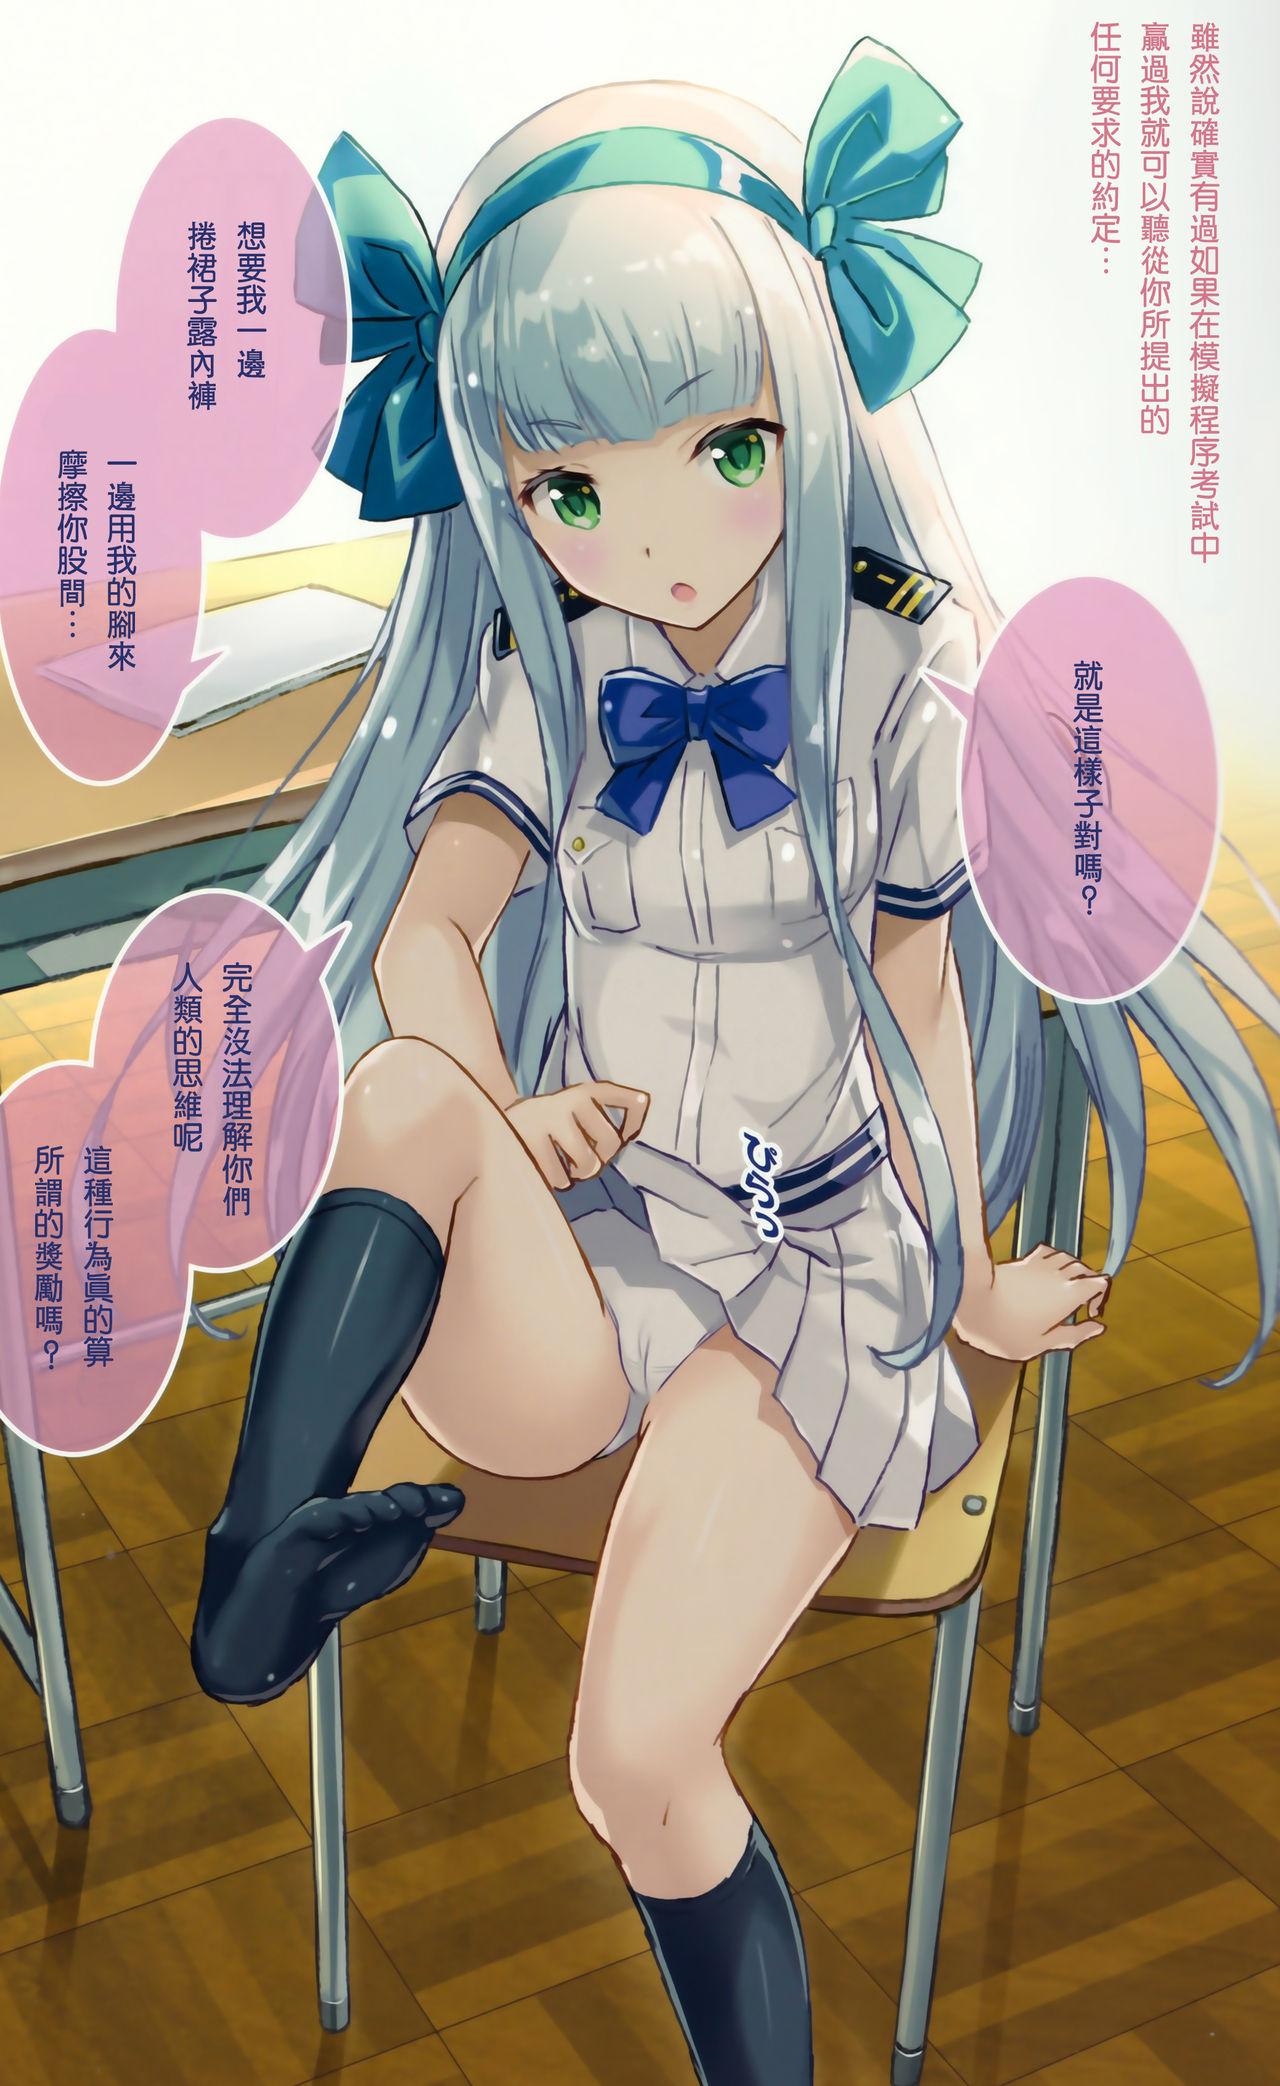 Perfect Girl Porn TAKAO OF BLUE STEEL 06 - Arpeggio of blue steel Missionary Porn - Page 7